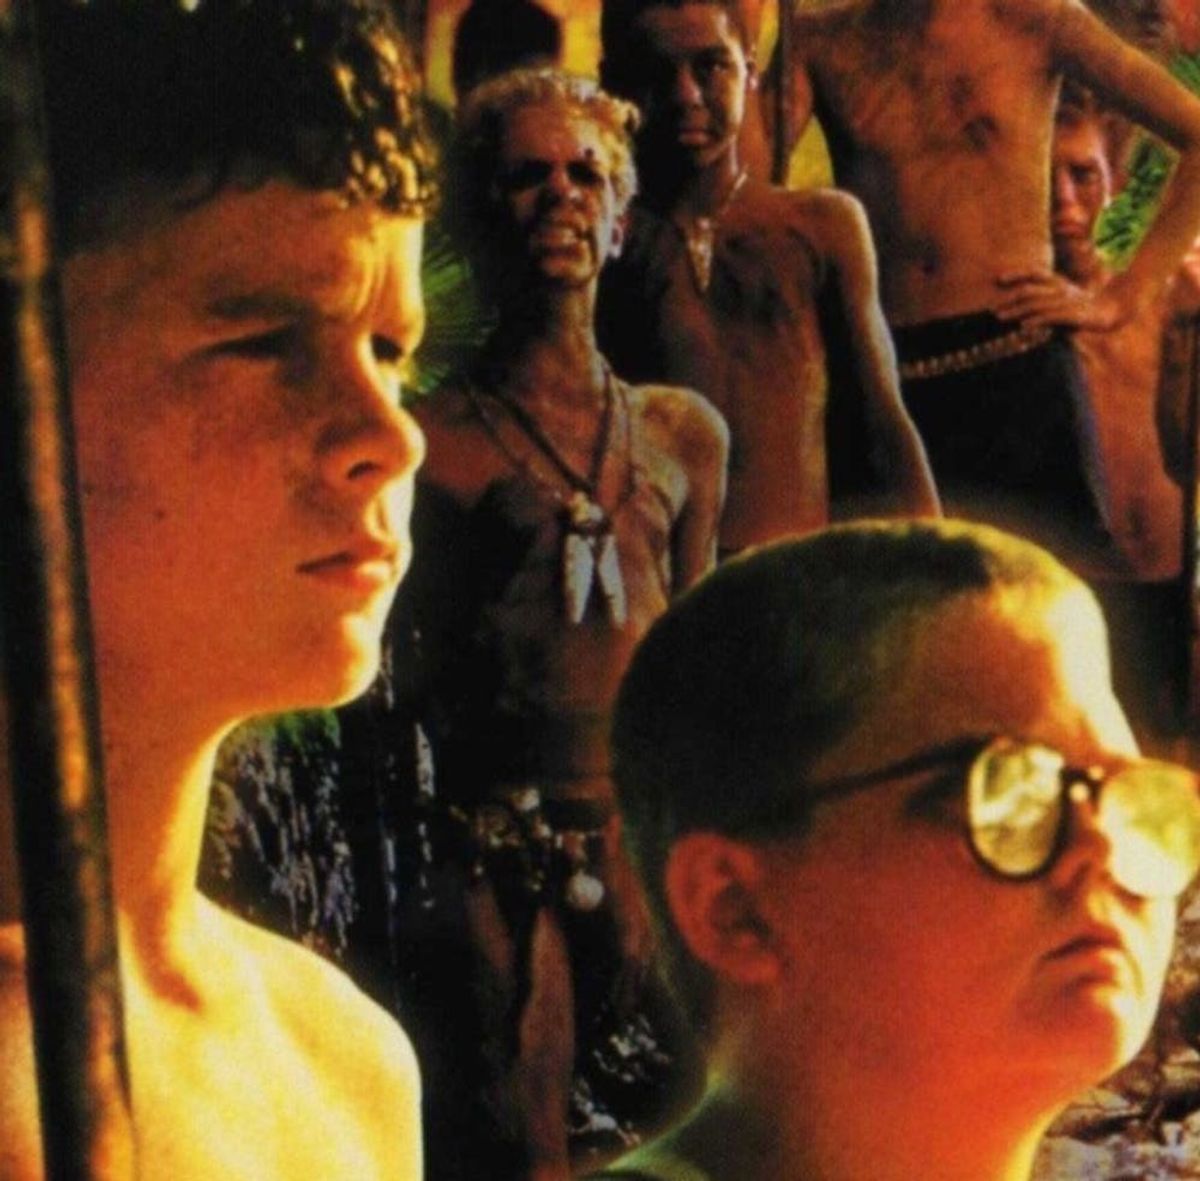 A “Lord of the Flies” Remake Is Happening With Female Actors and Twitter Is Up in Arms